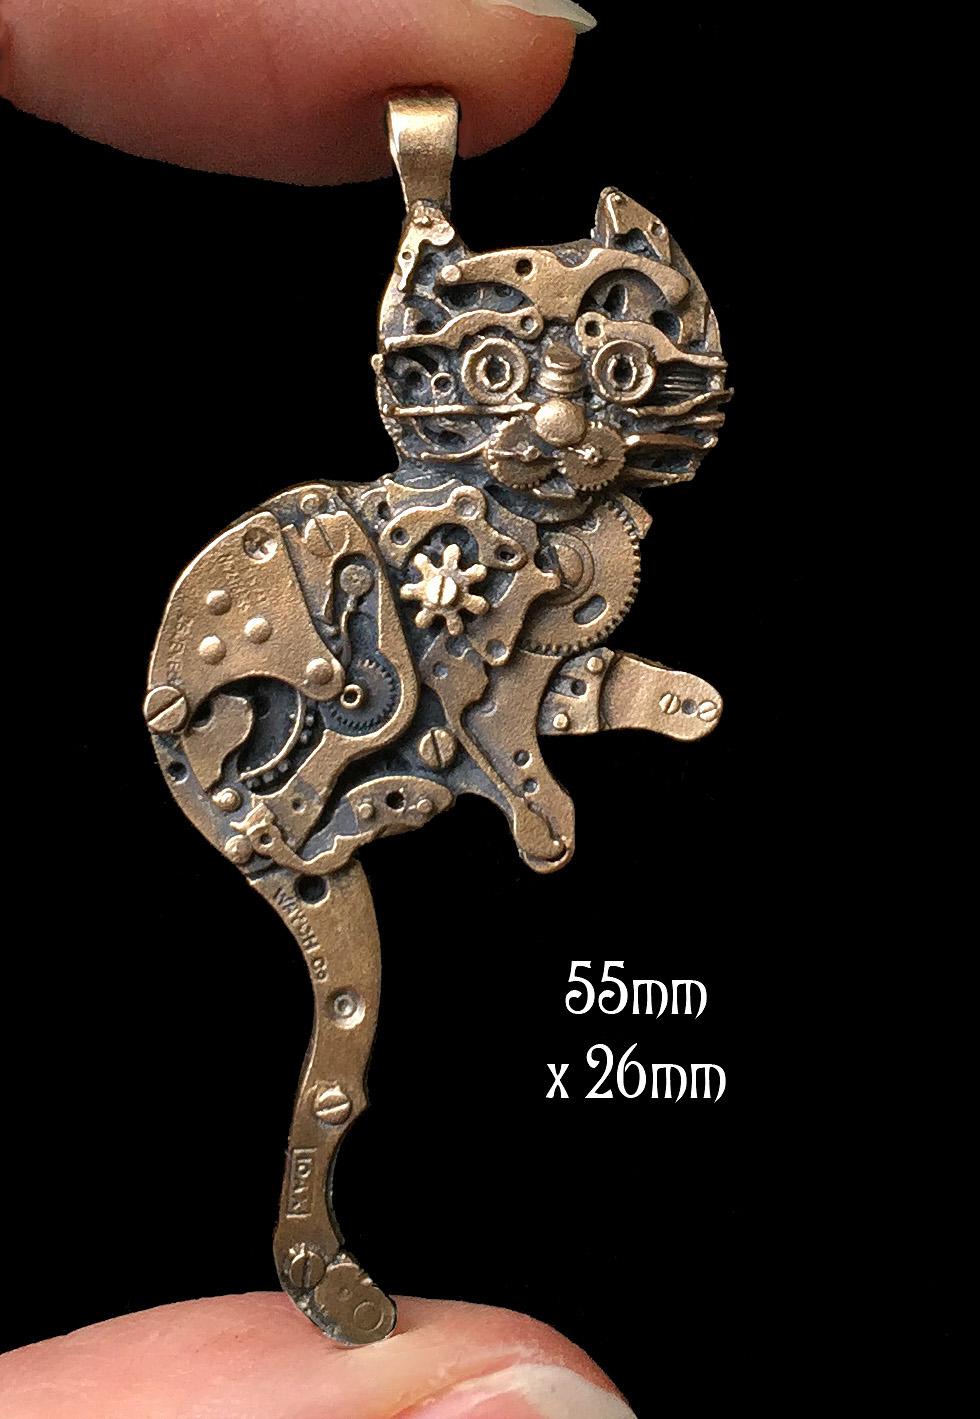 Close up photo of Watch Parts Kitty pendant made of silicon bronze in between fingers, designed by Sue Beatrice of All Natural Arts, featuring intricate details of antique watch parts.